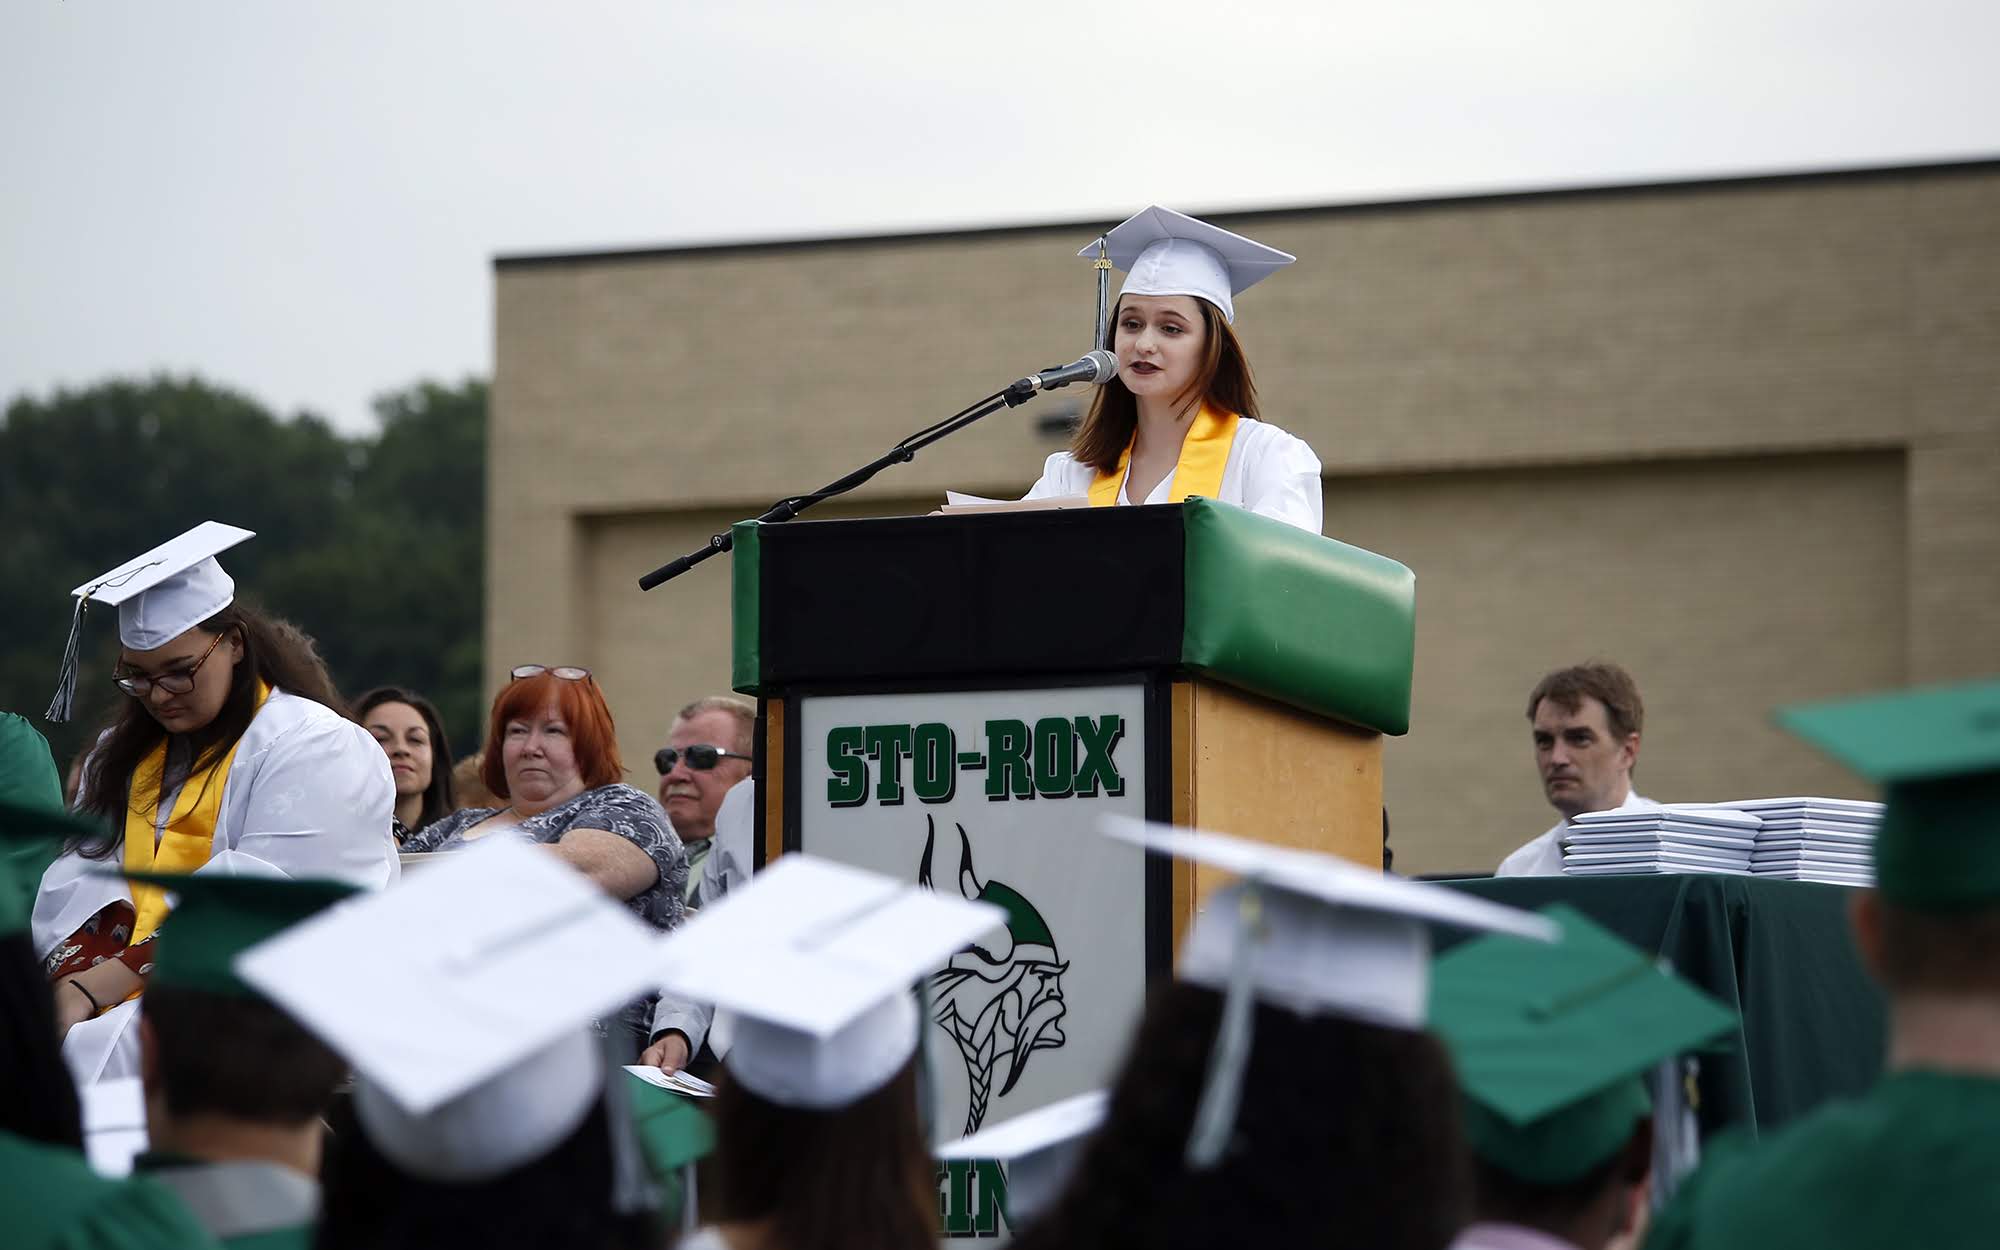 Cassandra Cropper, the Sto-Rox 2018 class salutatorian, delivers remarks at the high school's graduation ceremony on June 1, 2018.